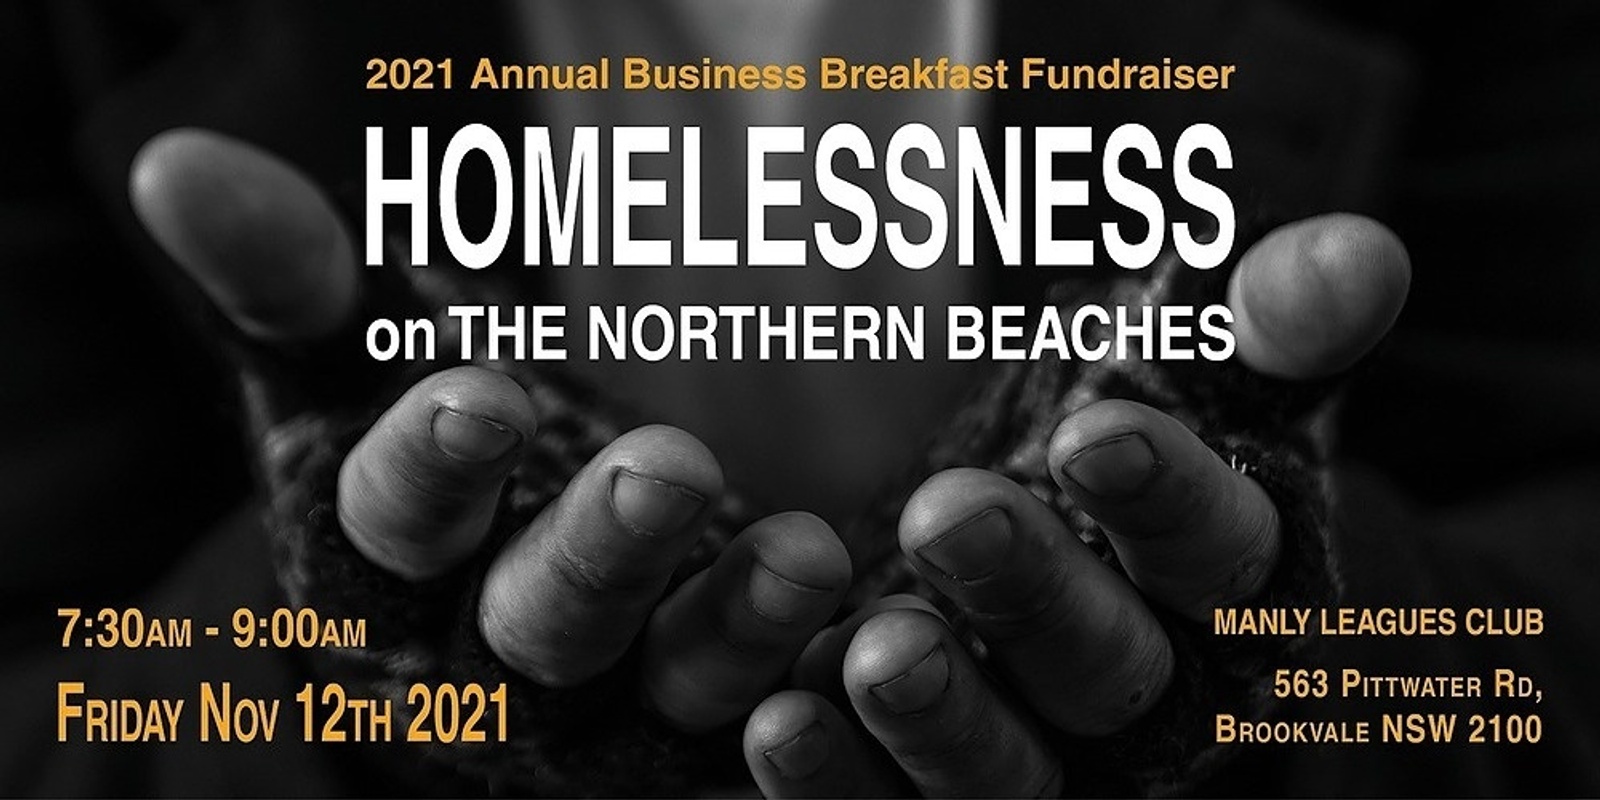 Banner image for Northern Beaches Annual Fundraiser - "Homelessness on the Northern Beaches"